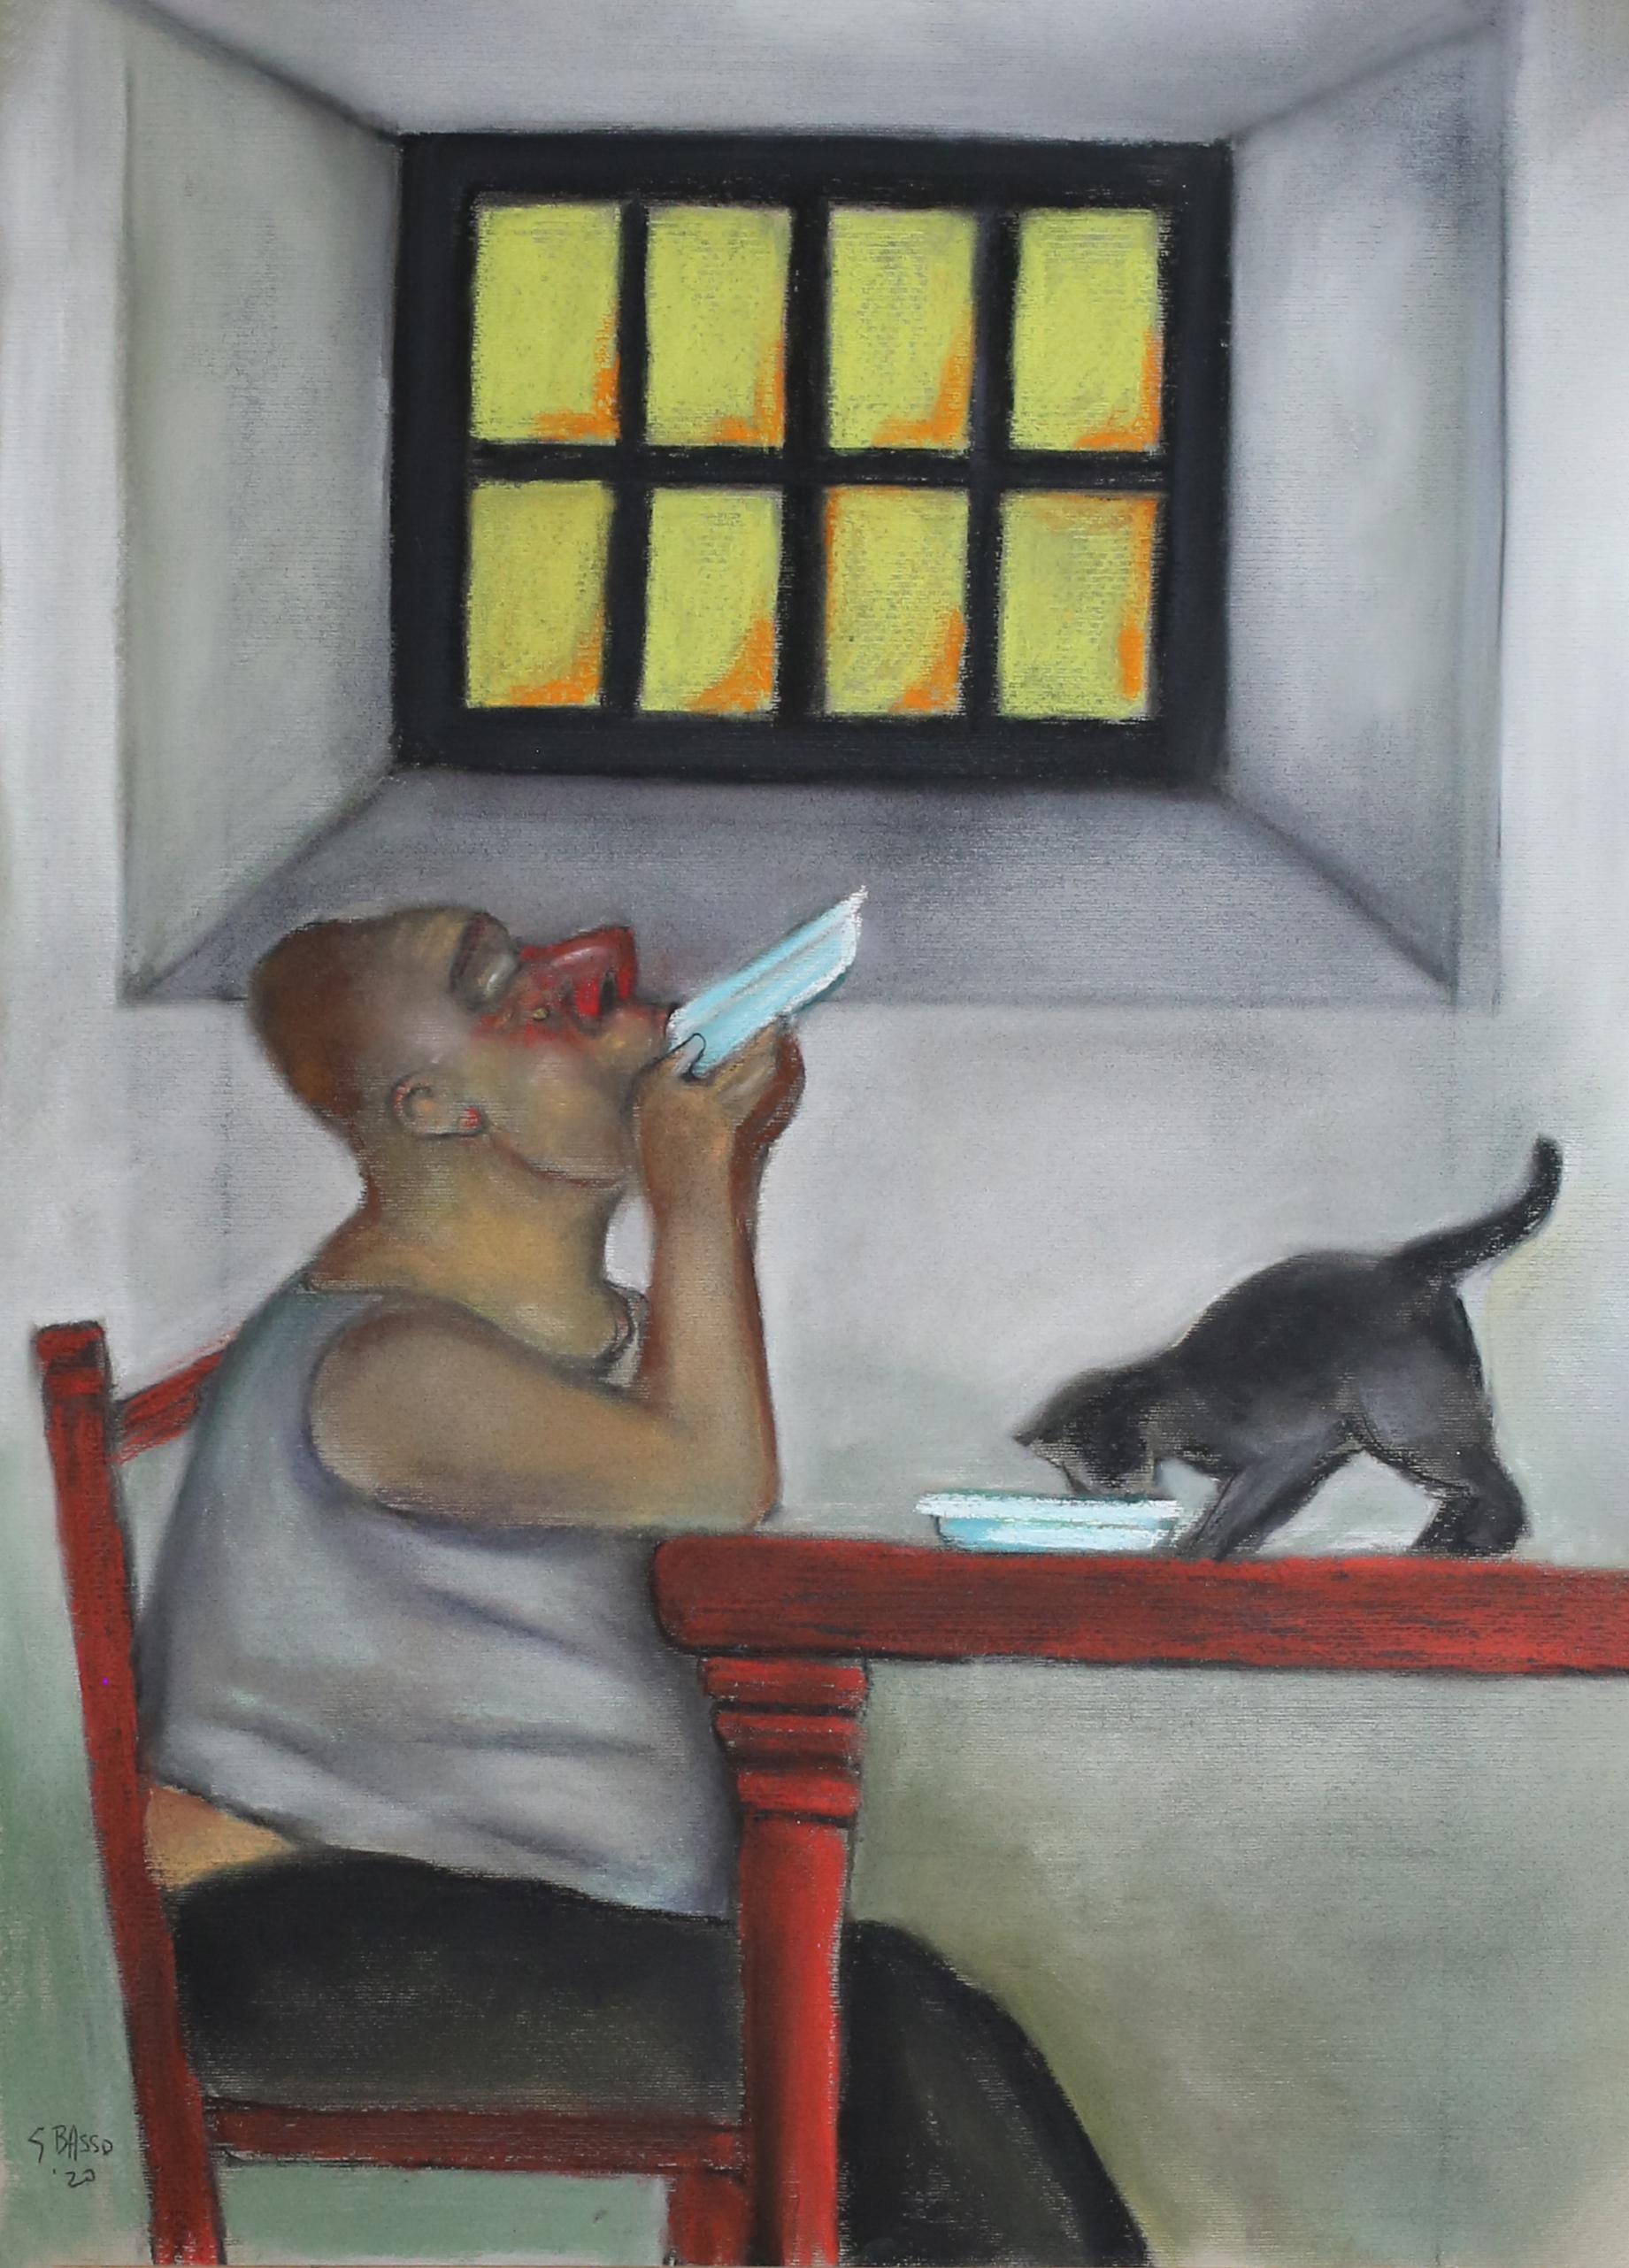 Isolation Blues  contemporary social realism dark humor topical art man cat - Art by Stephen Basso